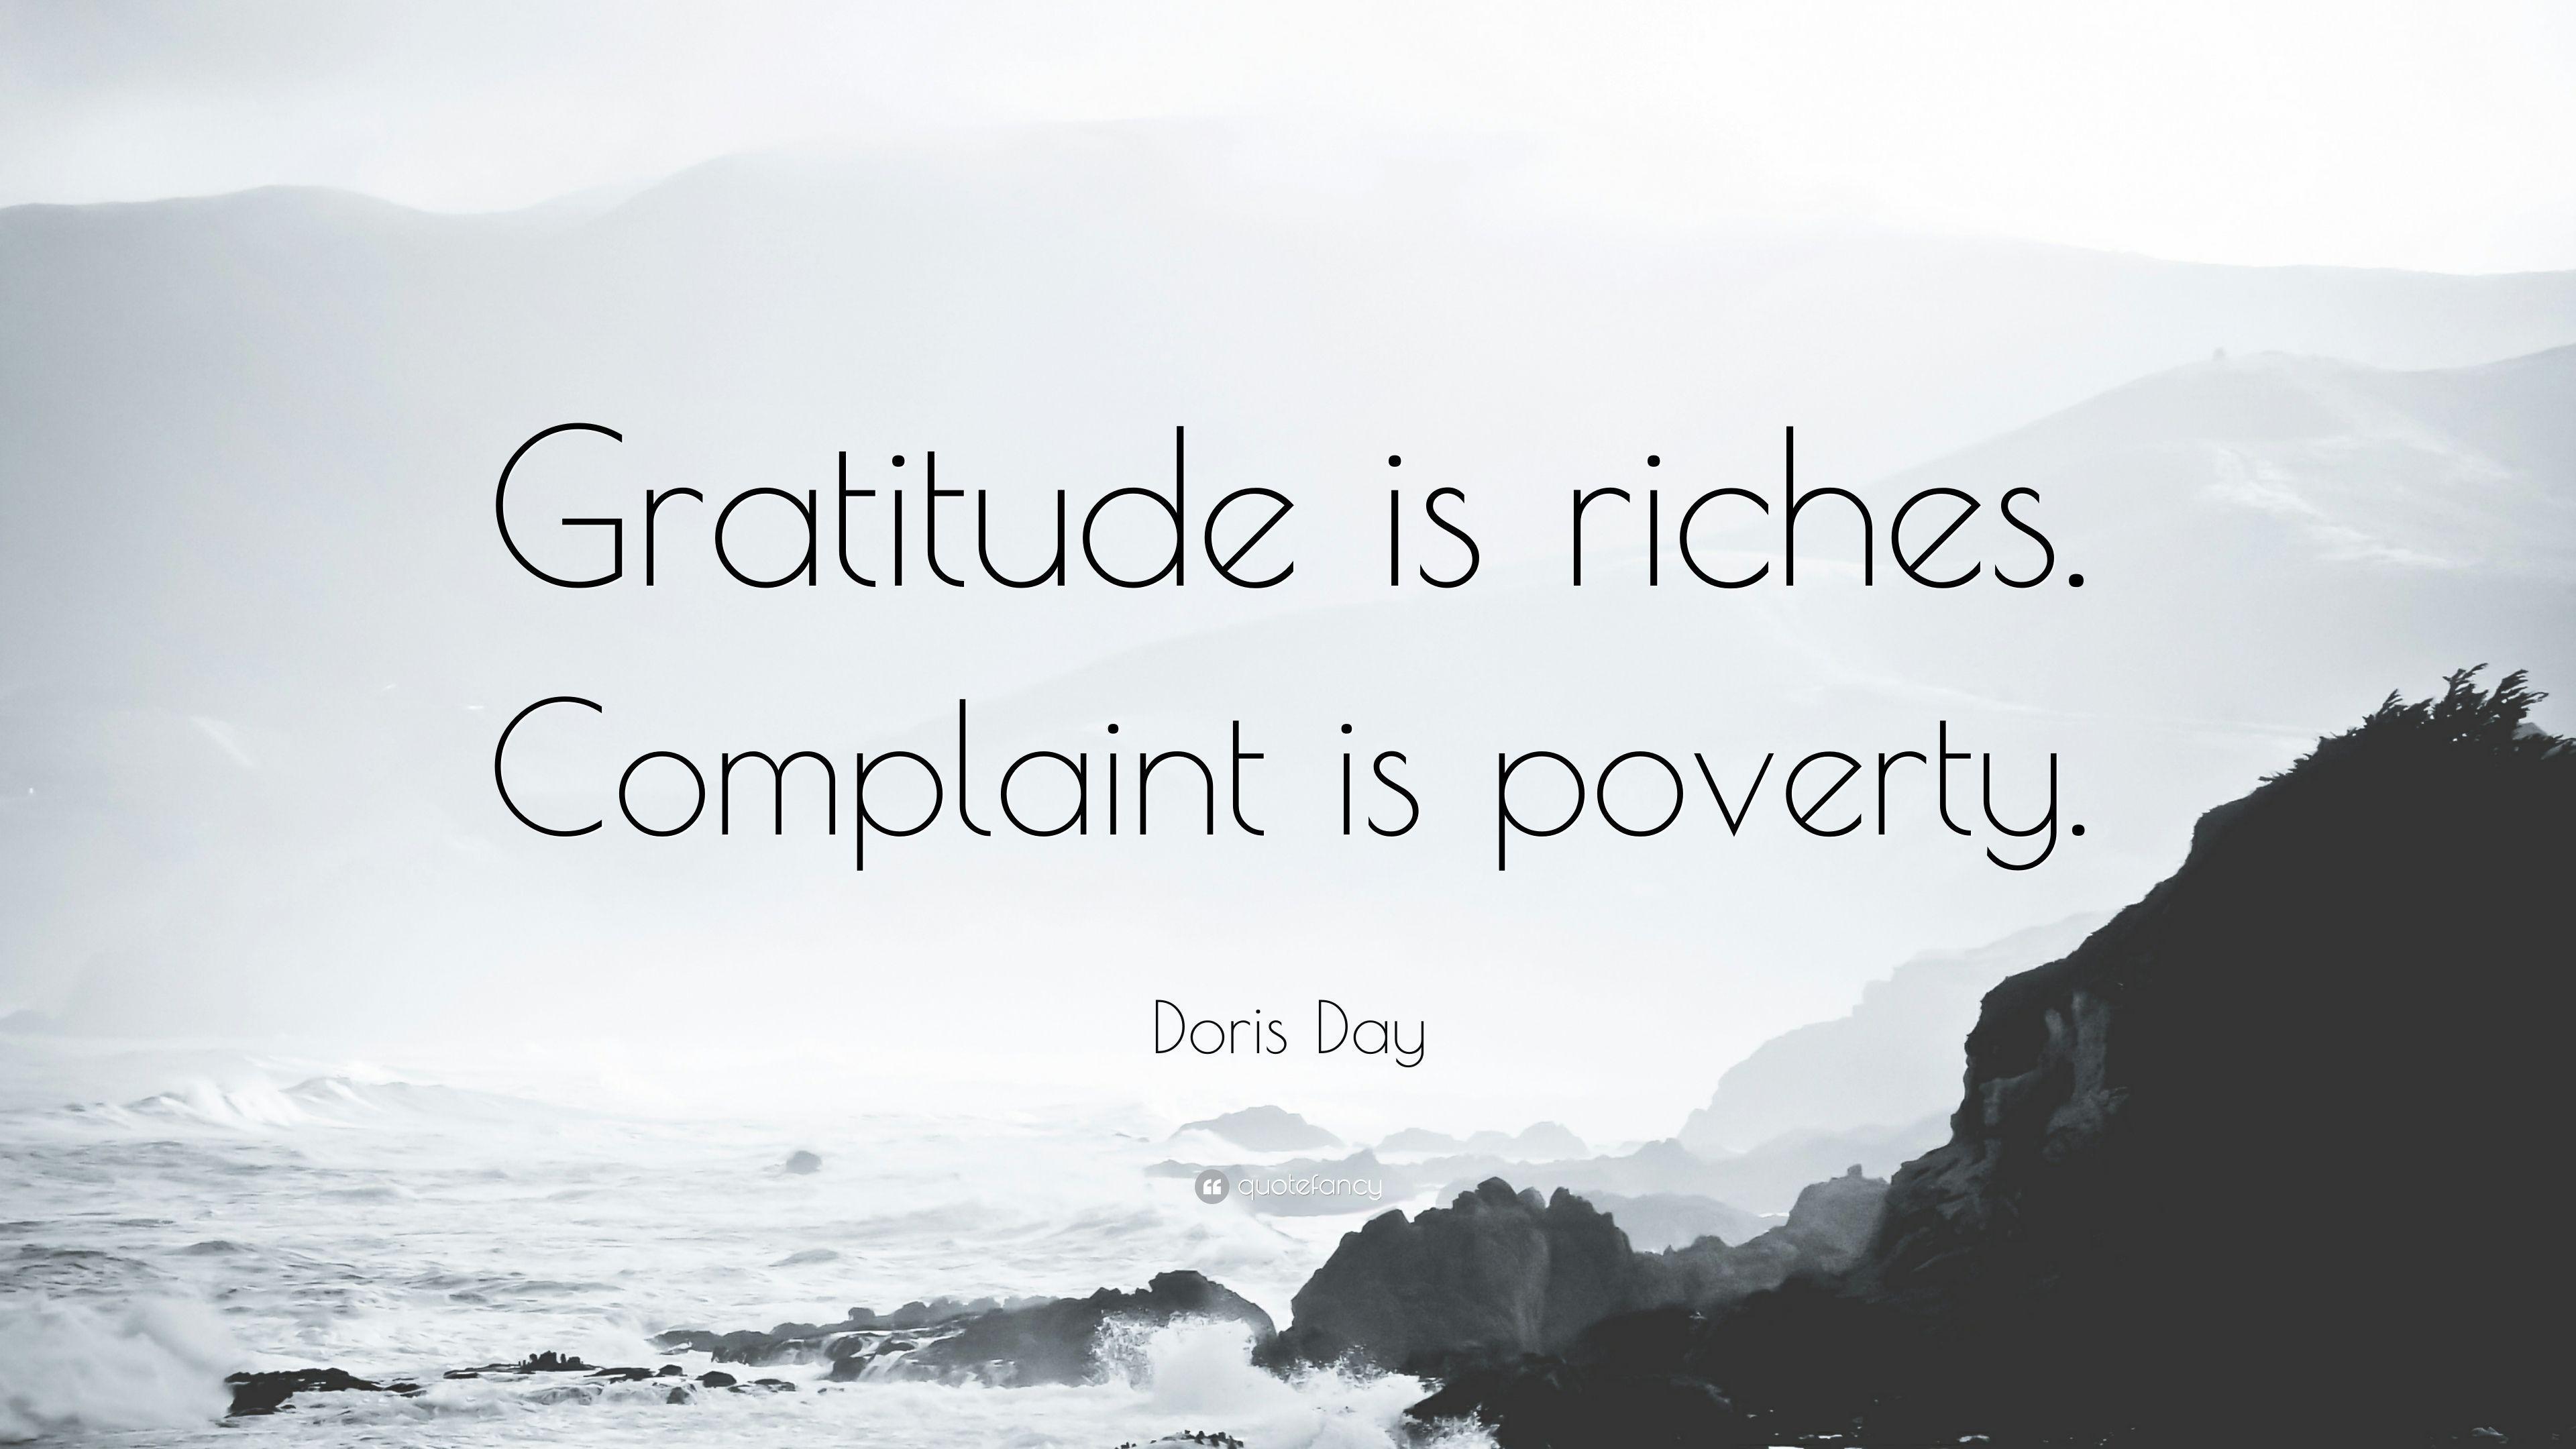 Doris Day Quote: “Gratitude is riches. Complaint is poverty.” 17